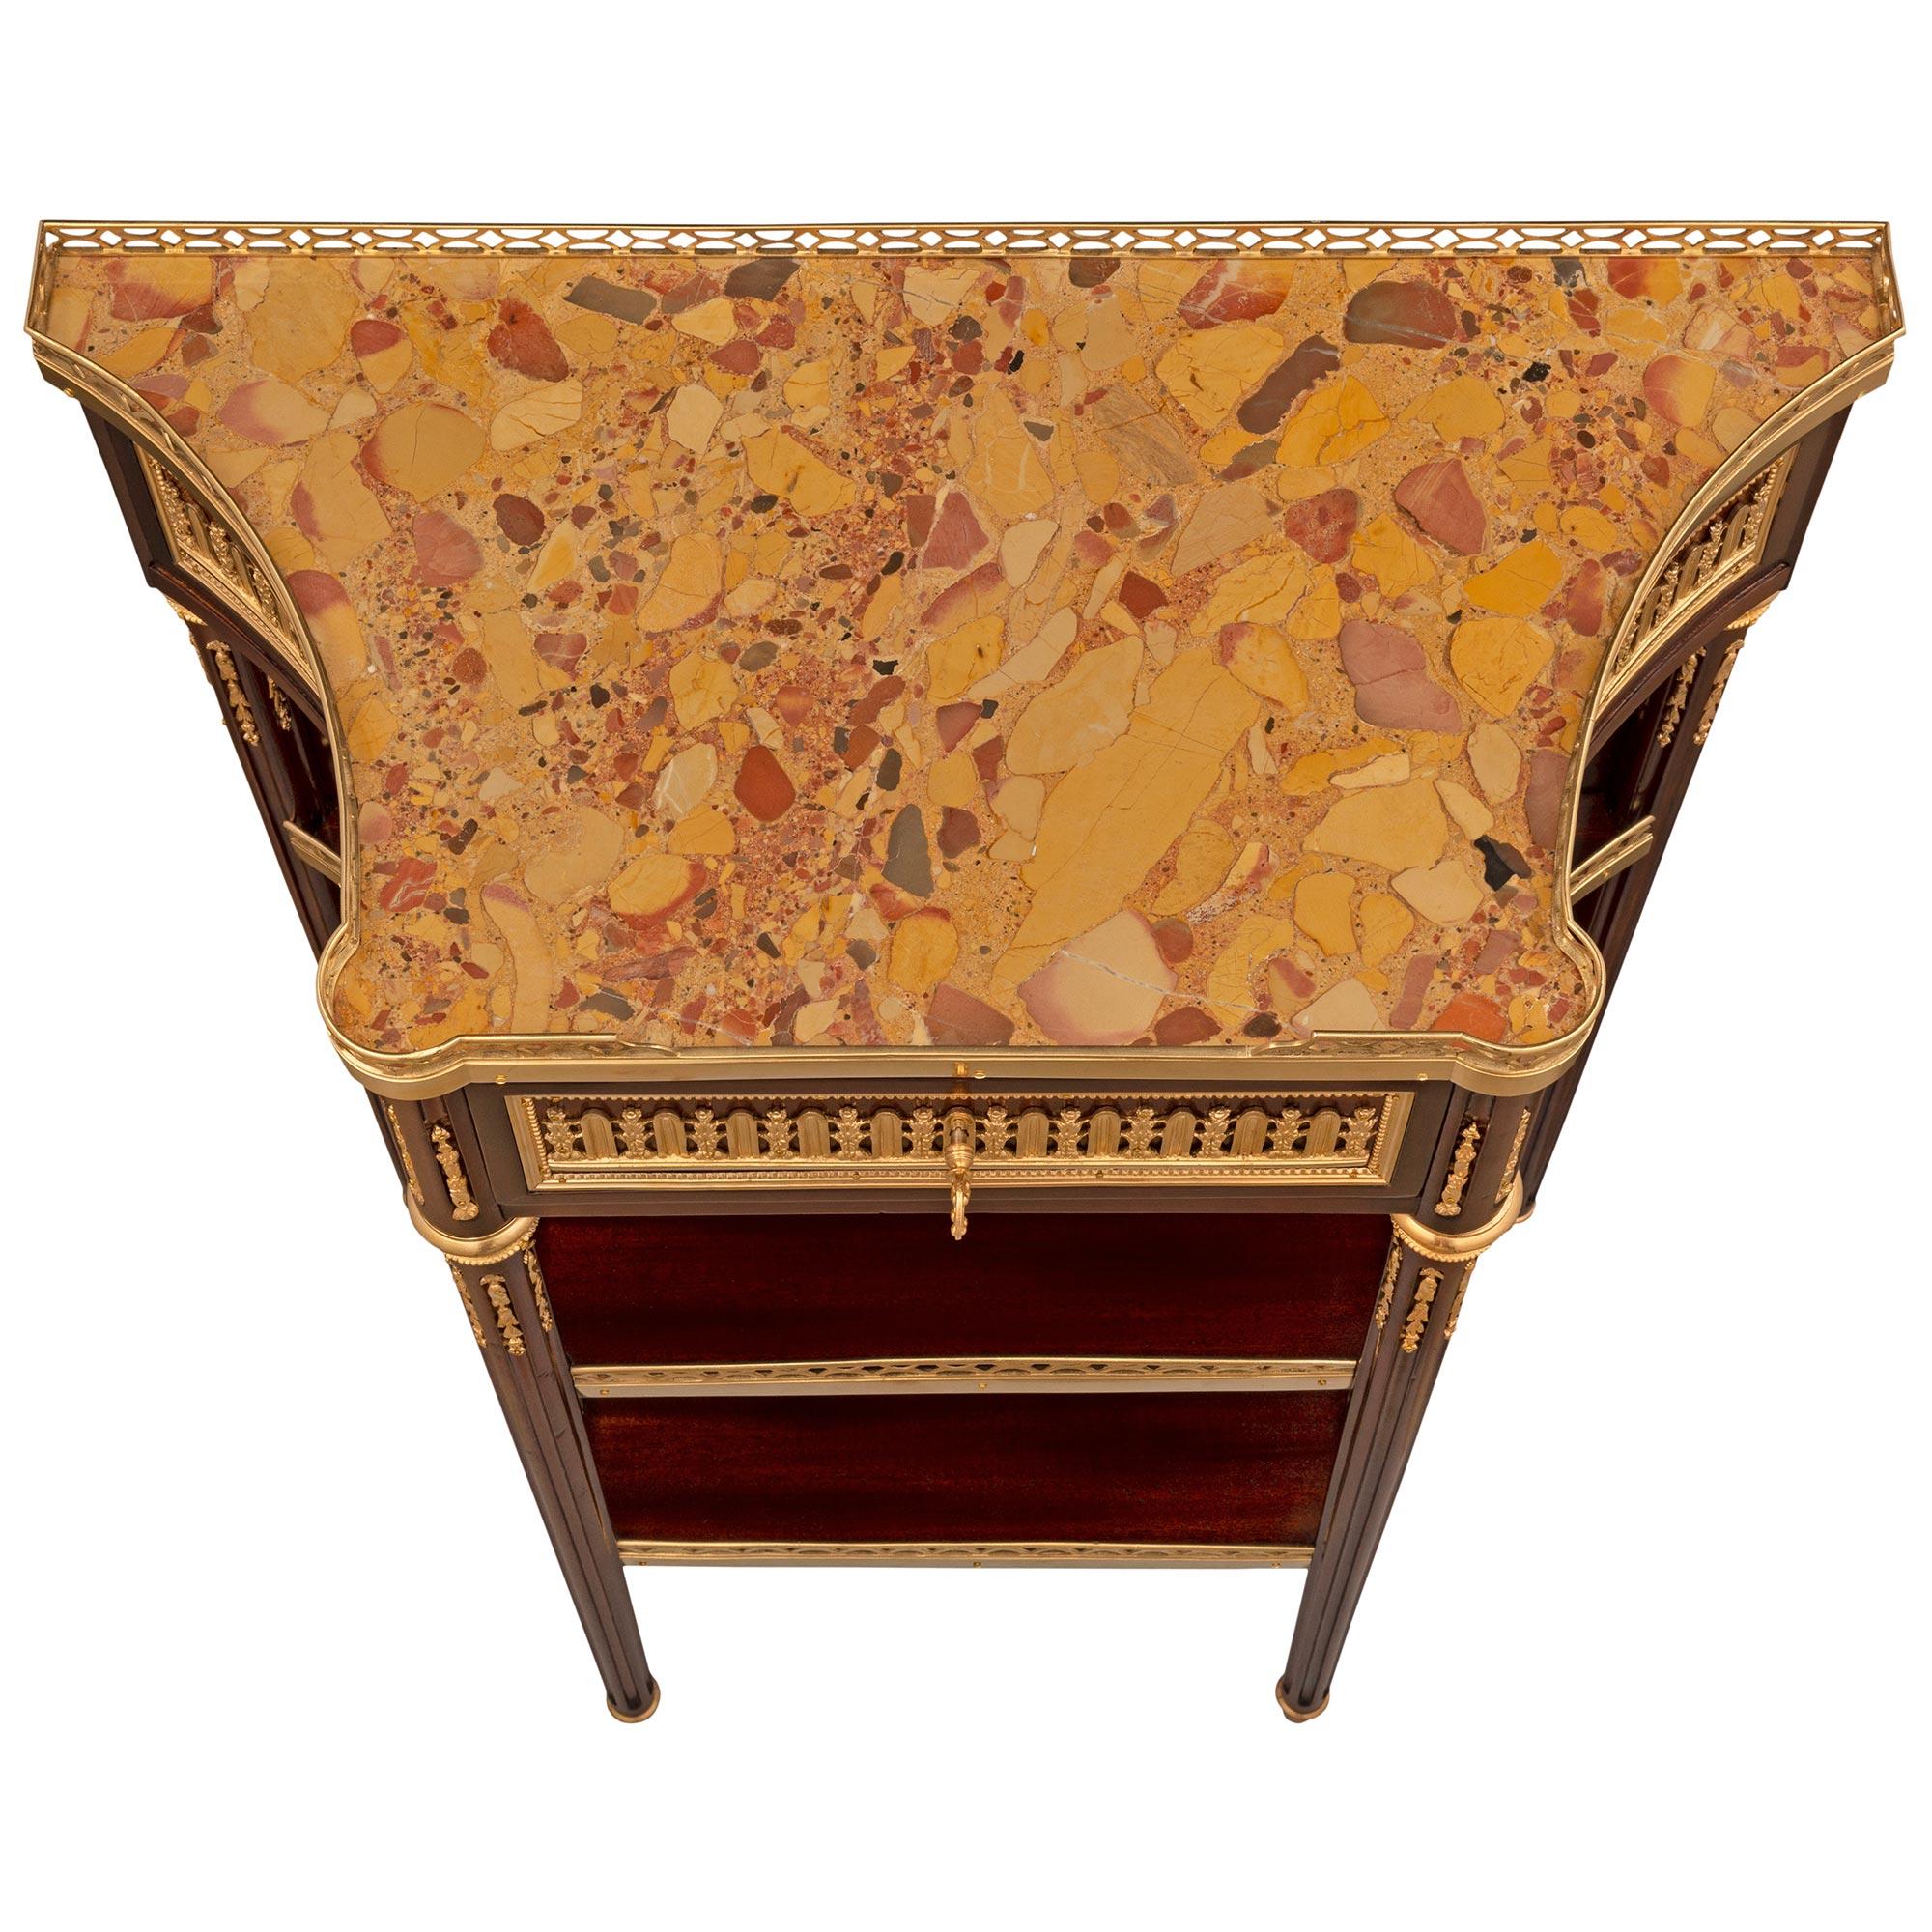 A most elegant and high quality French 19th century Louis XVI st. Belle Époque period mahogany, ormolu and Brèche d'Alep marble console, signed by Paul Sormani. The console is raised by fine circular tapered fluted supports with lovely ball topie